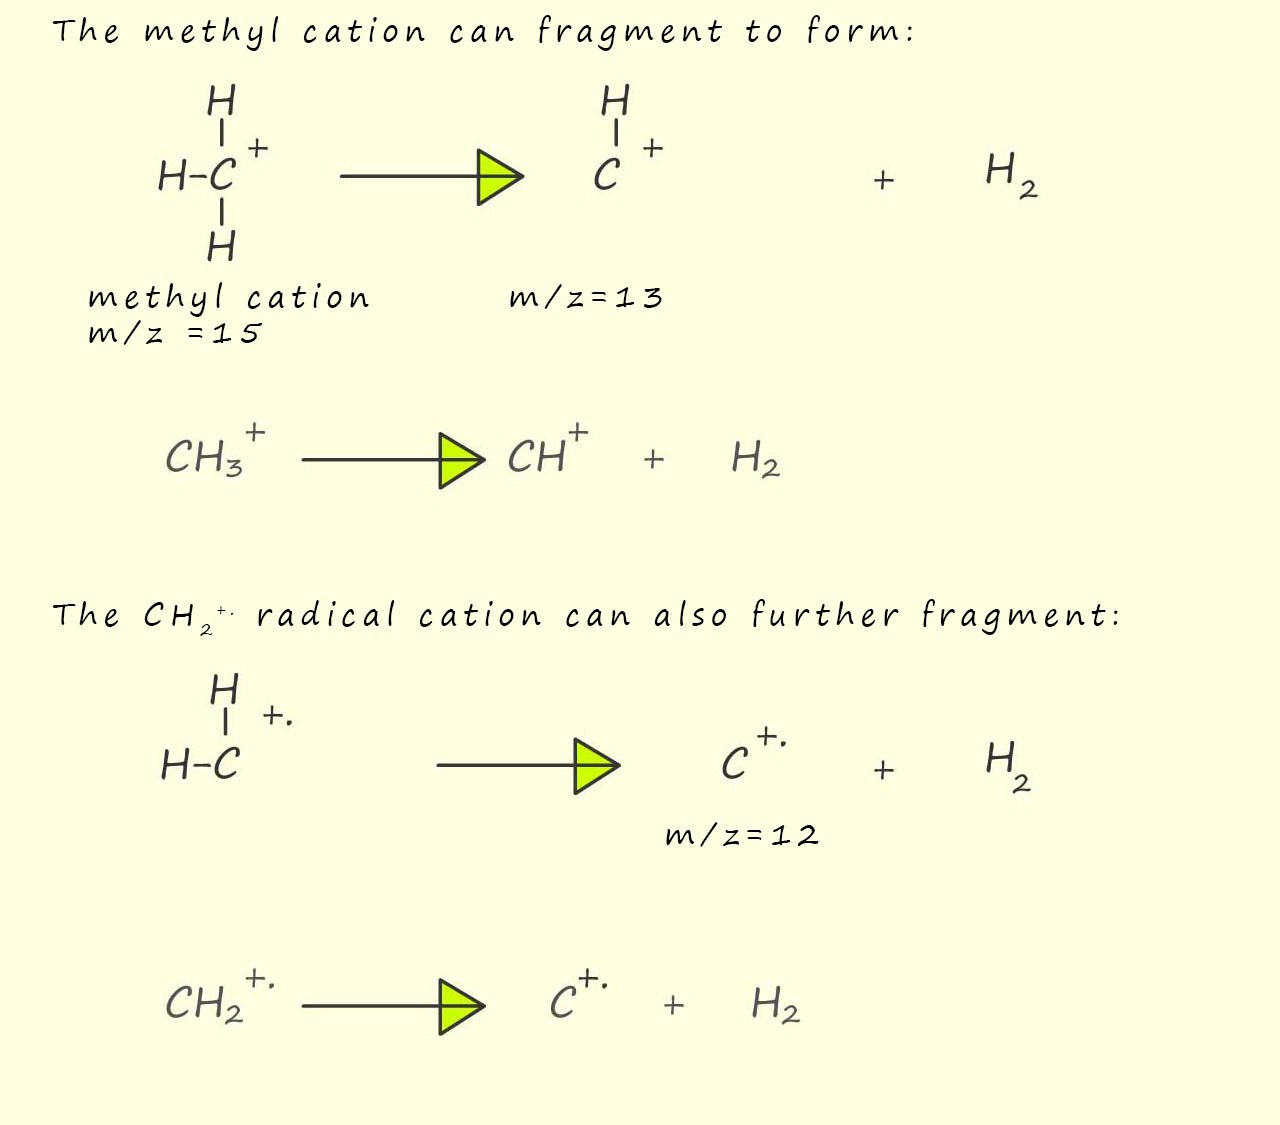 Equations to show ions produced during the fragmentation of methane in a mass spectrometer.